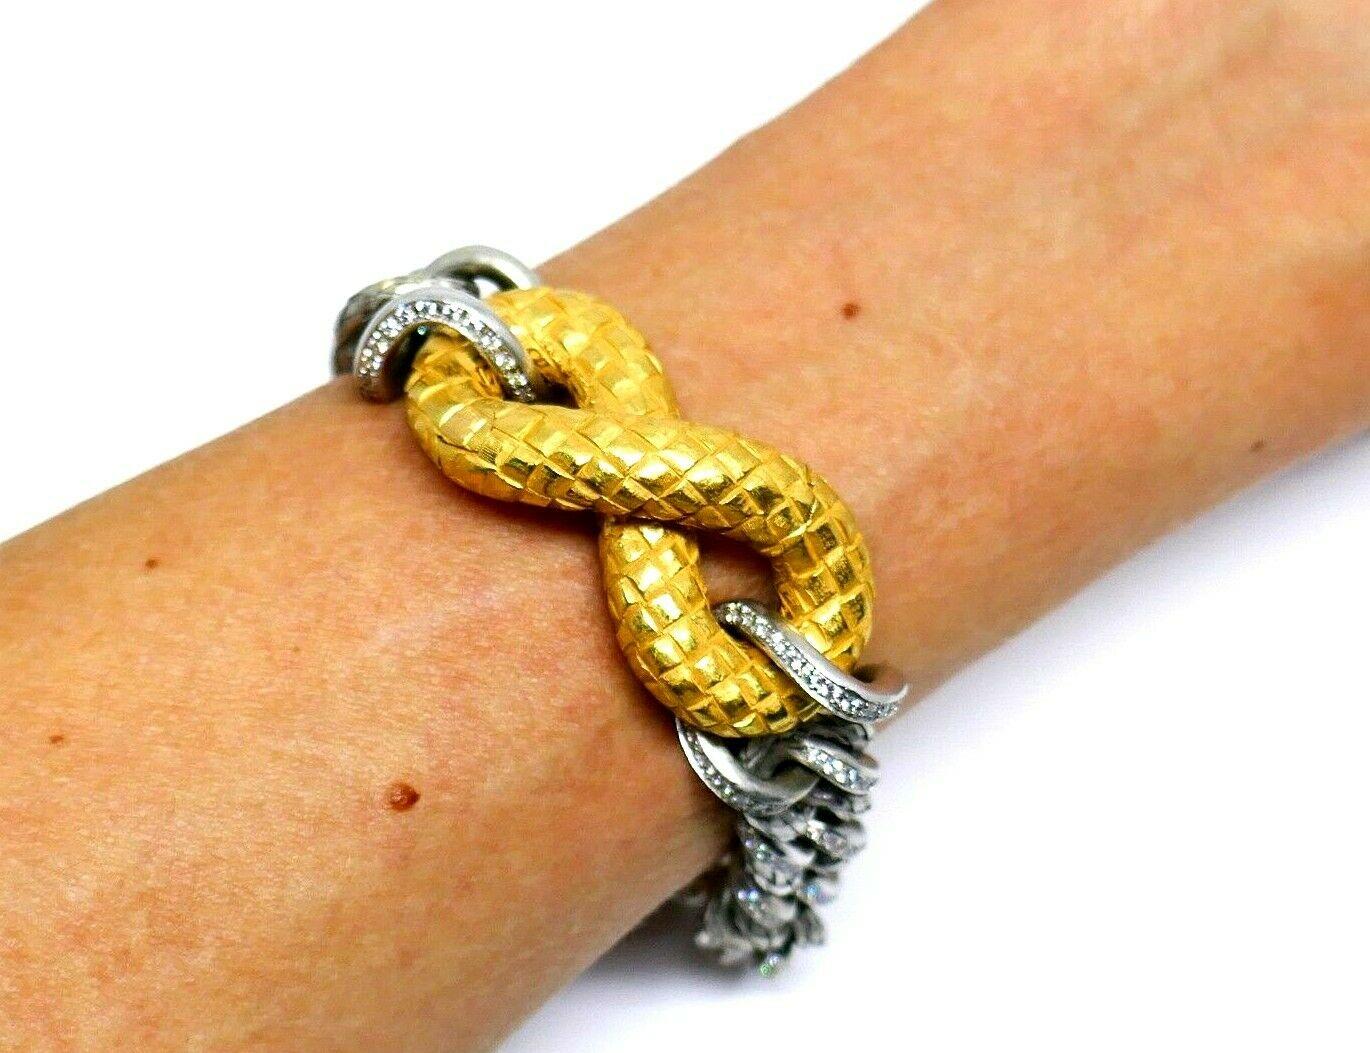 Rare Bottega Veneta Torcello bracelet made of 18k white gold featuring pave diamonds and 18k yellow gold clasp. The clasp has an invisible closure. Gold is hammered and textured. Stamped with the Bottega Veneta maker's mark and a hallmark for 18k